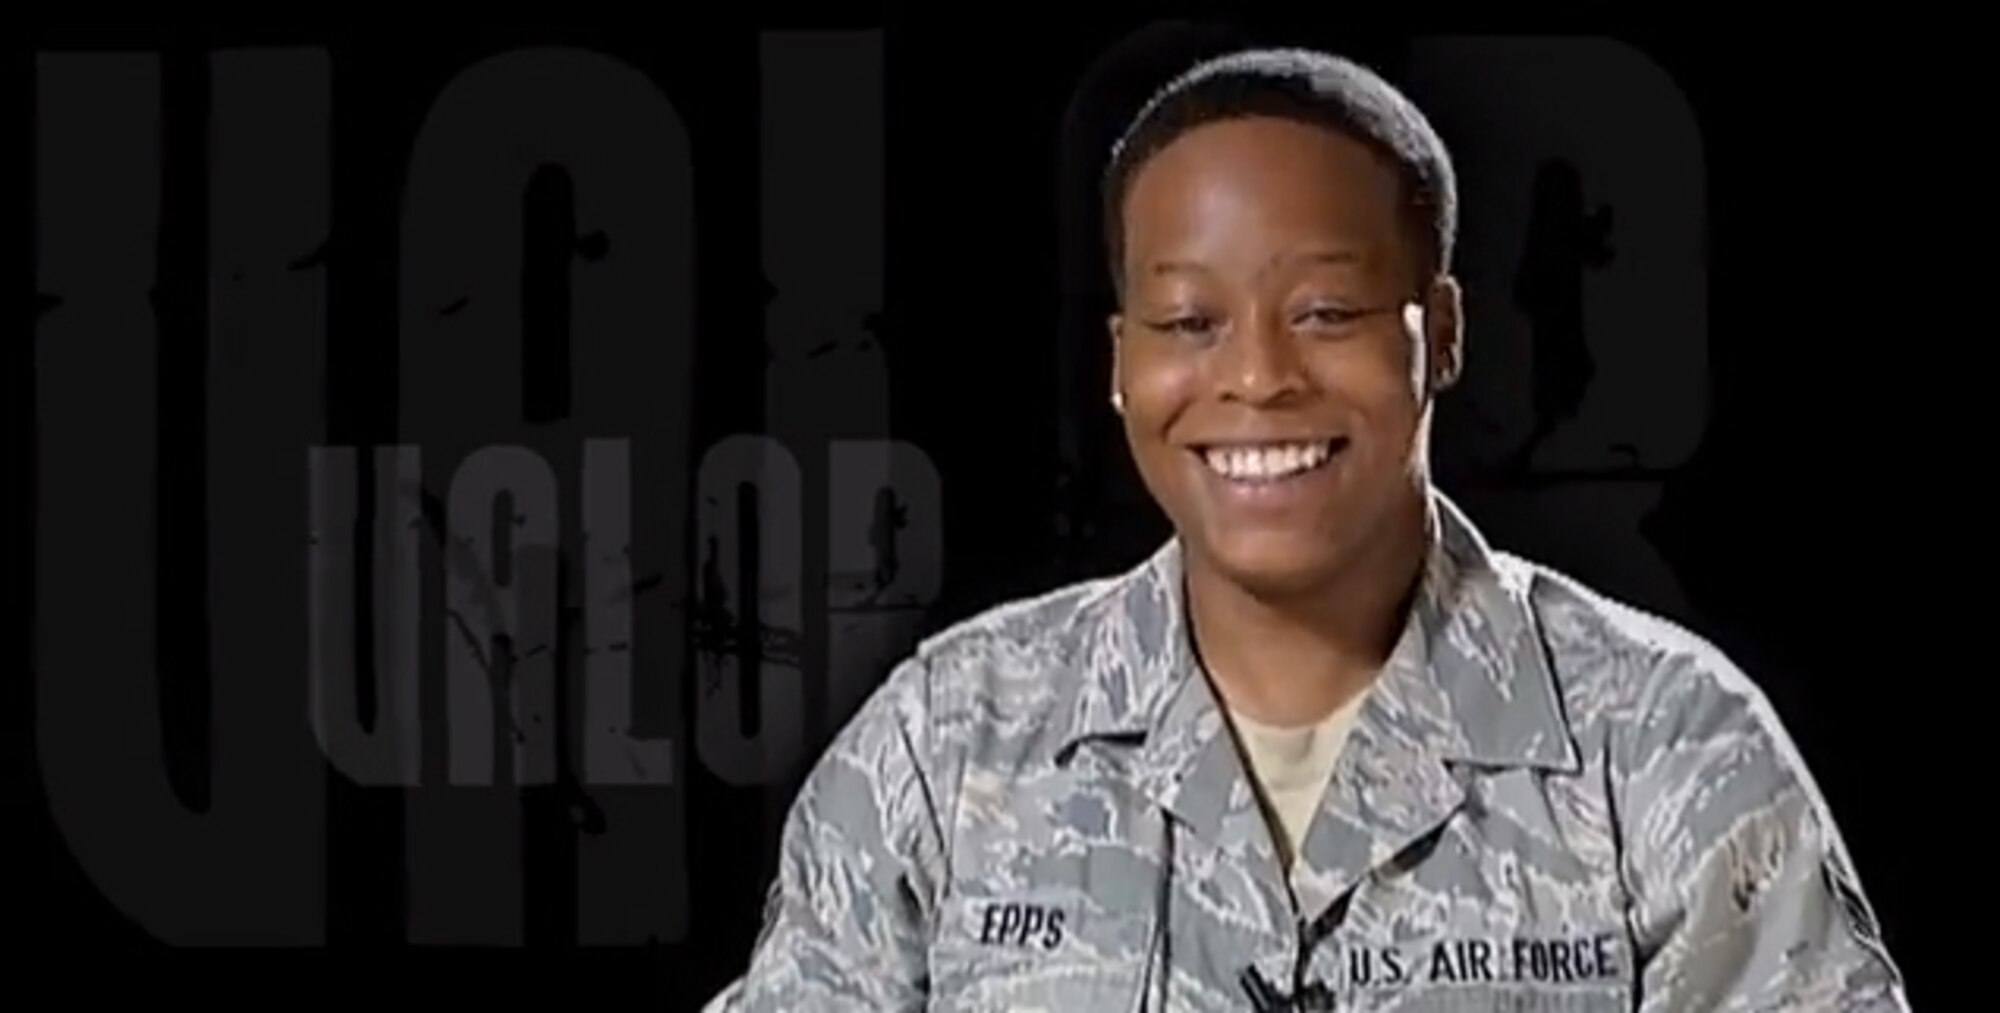 Air Force photographer Chanise Epps